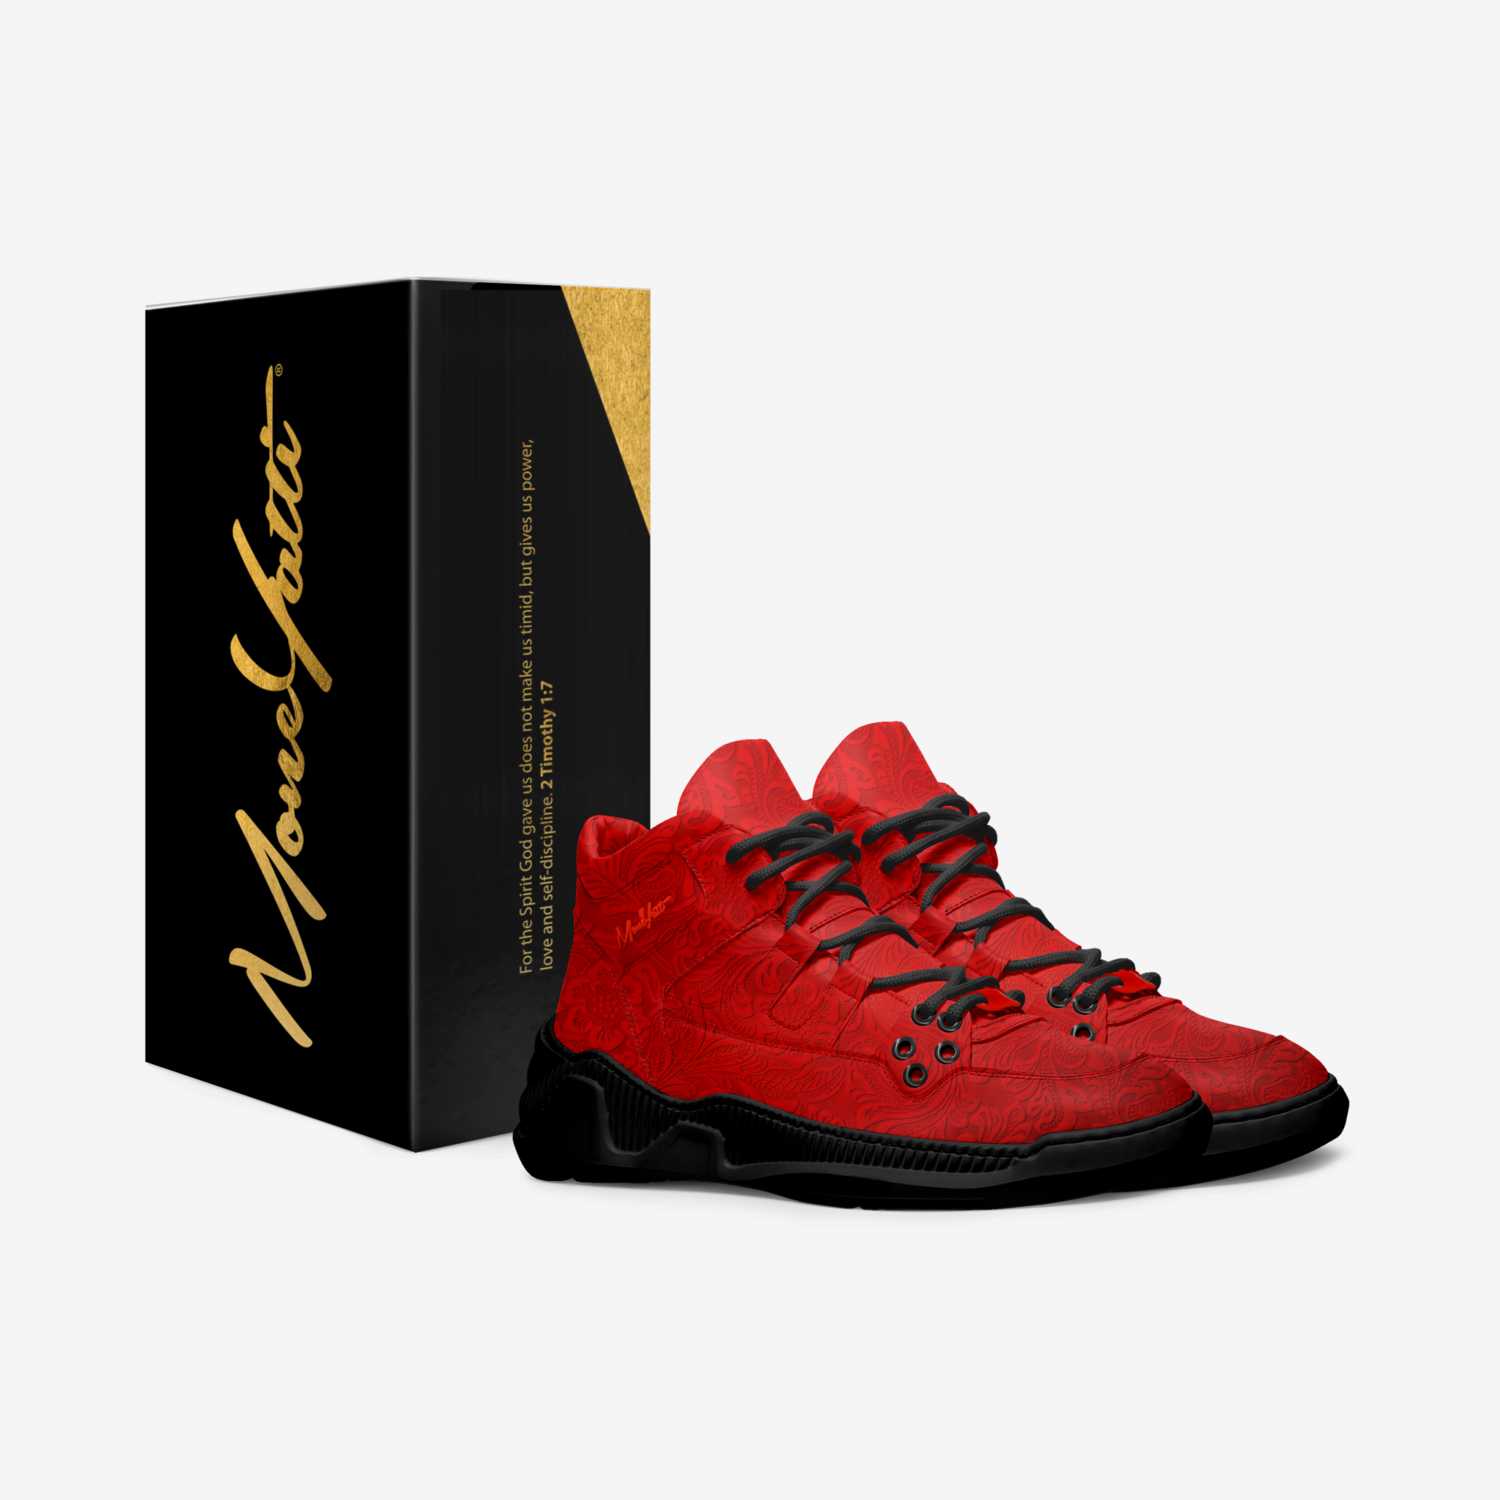 Masterpiece 006 custom made in Italy shoes by Moneyatti Brand | Box view